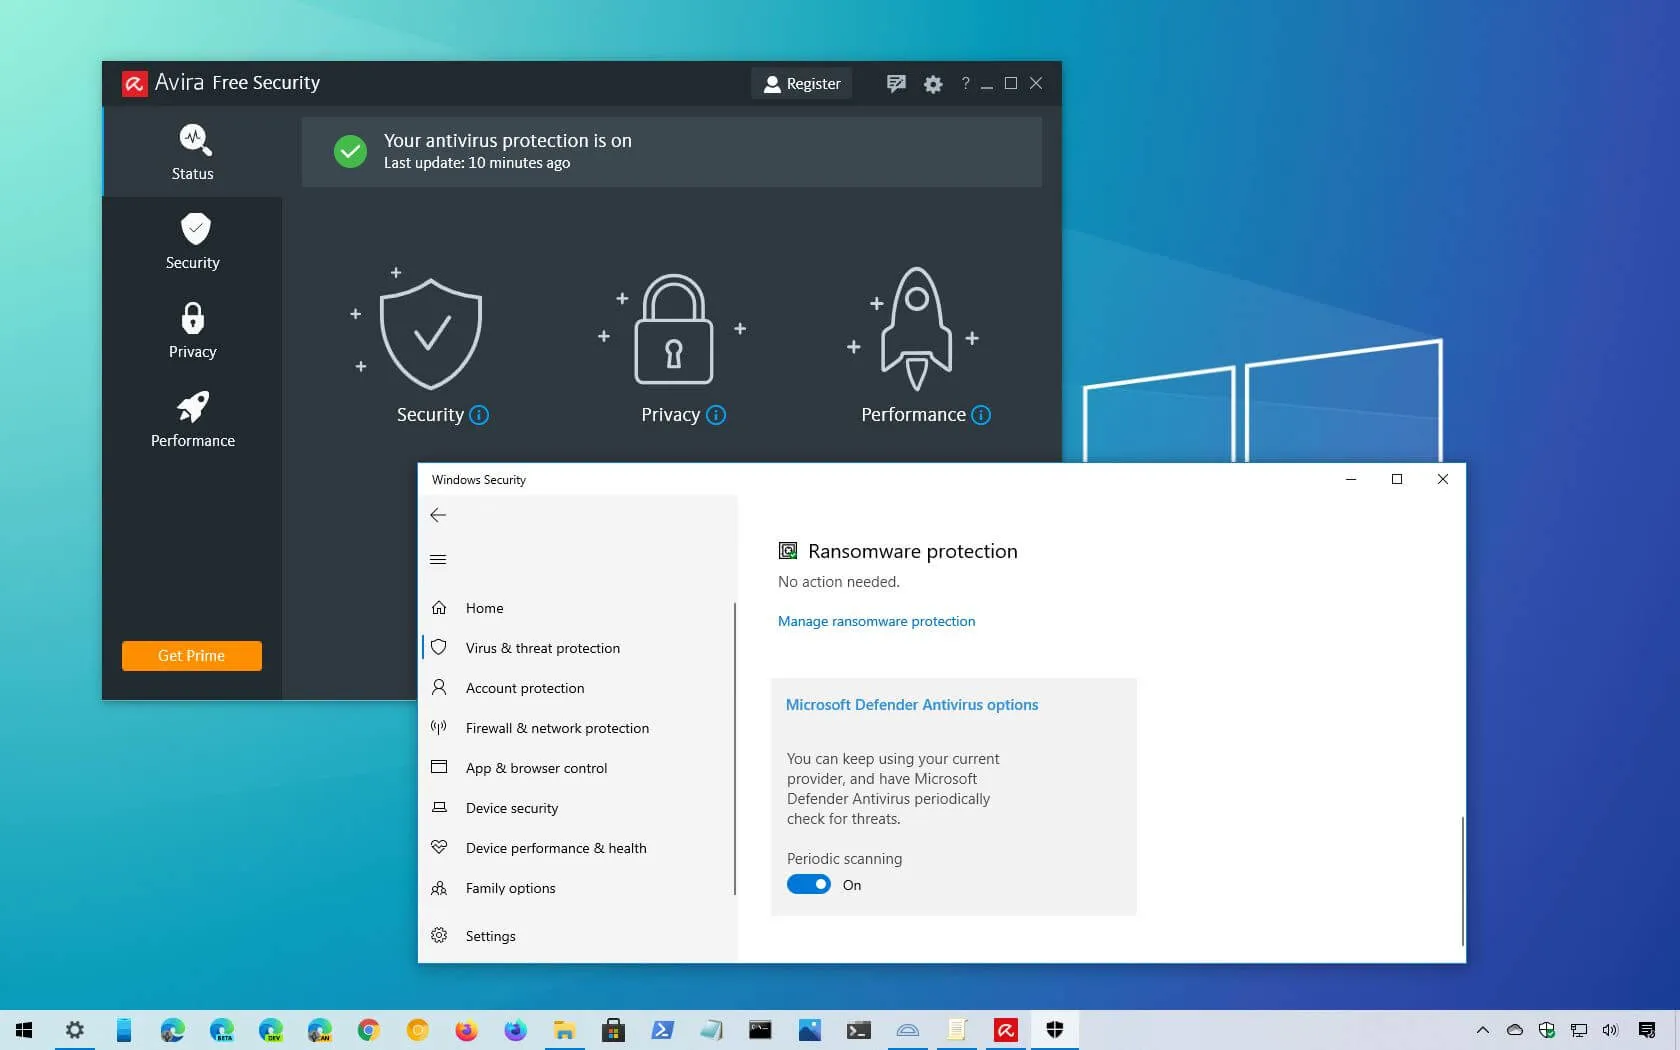 How to enable Defender Antivirus Periodic scanning on Windows 10